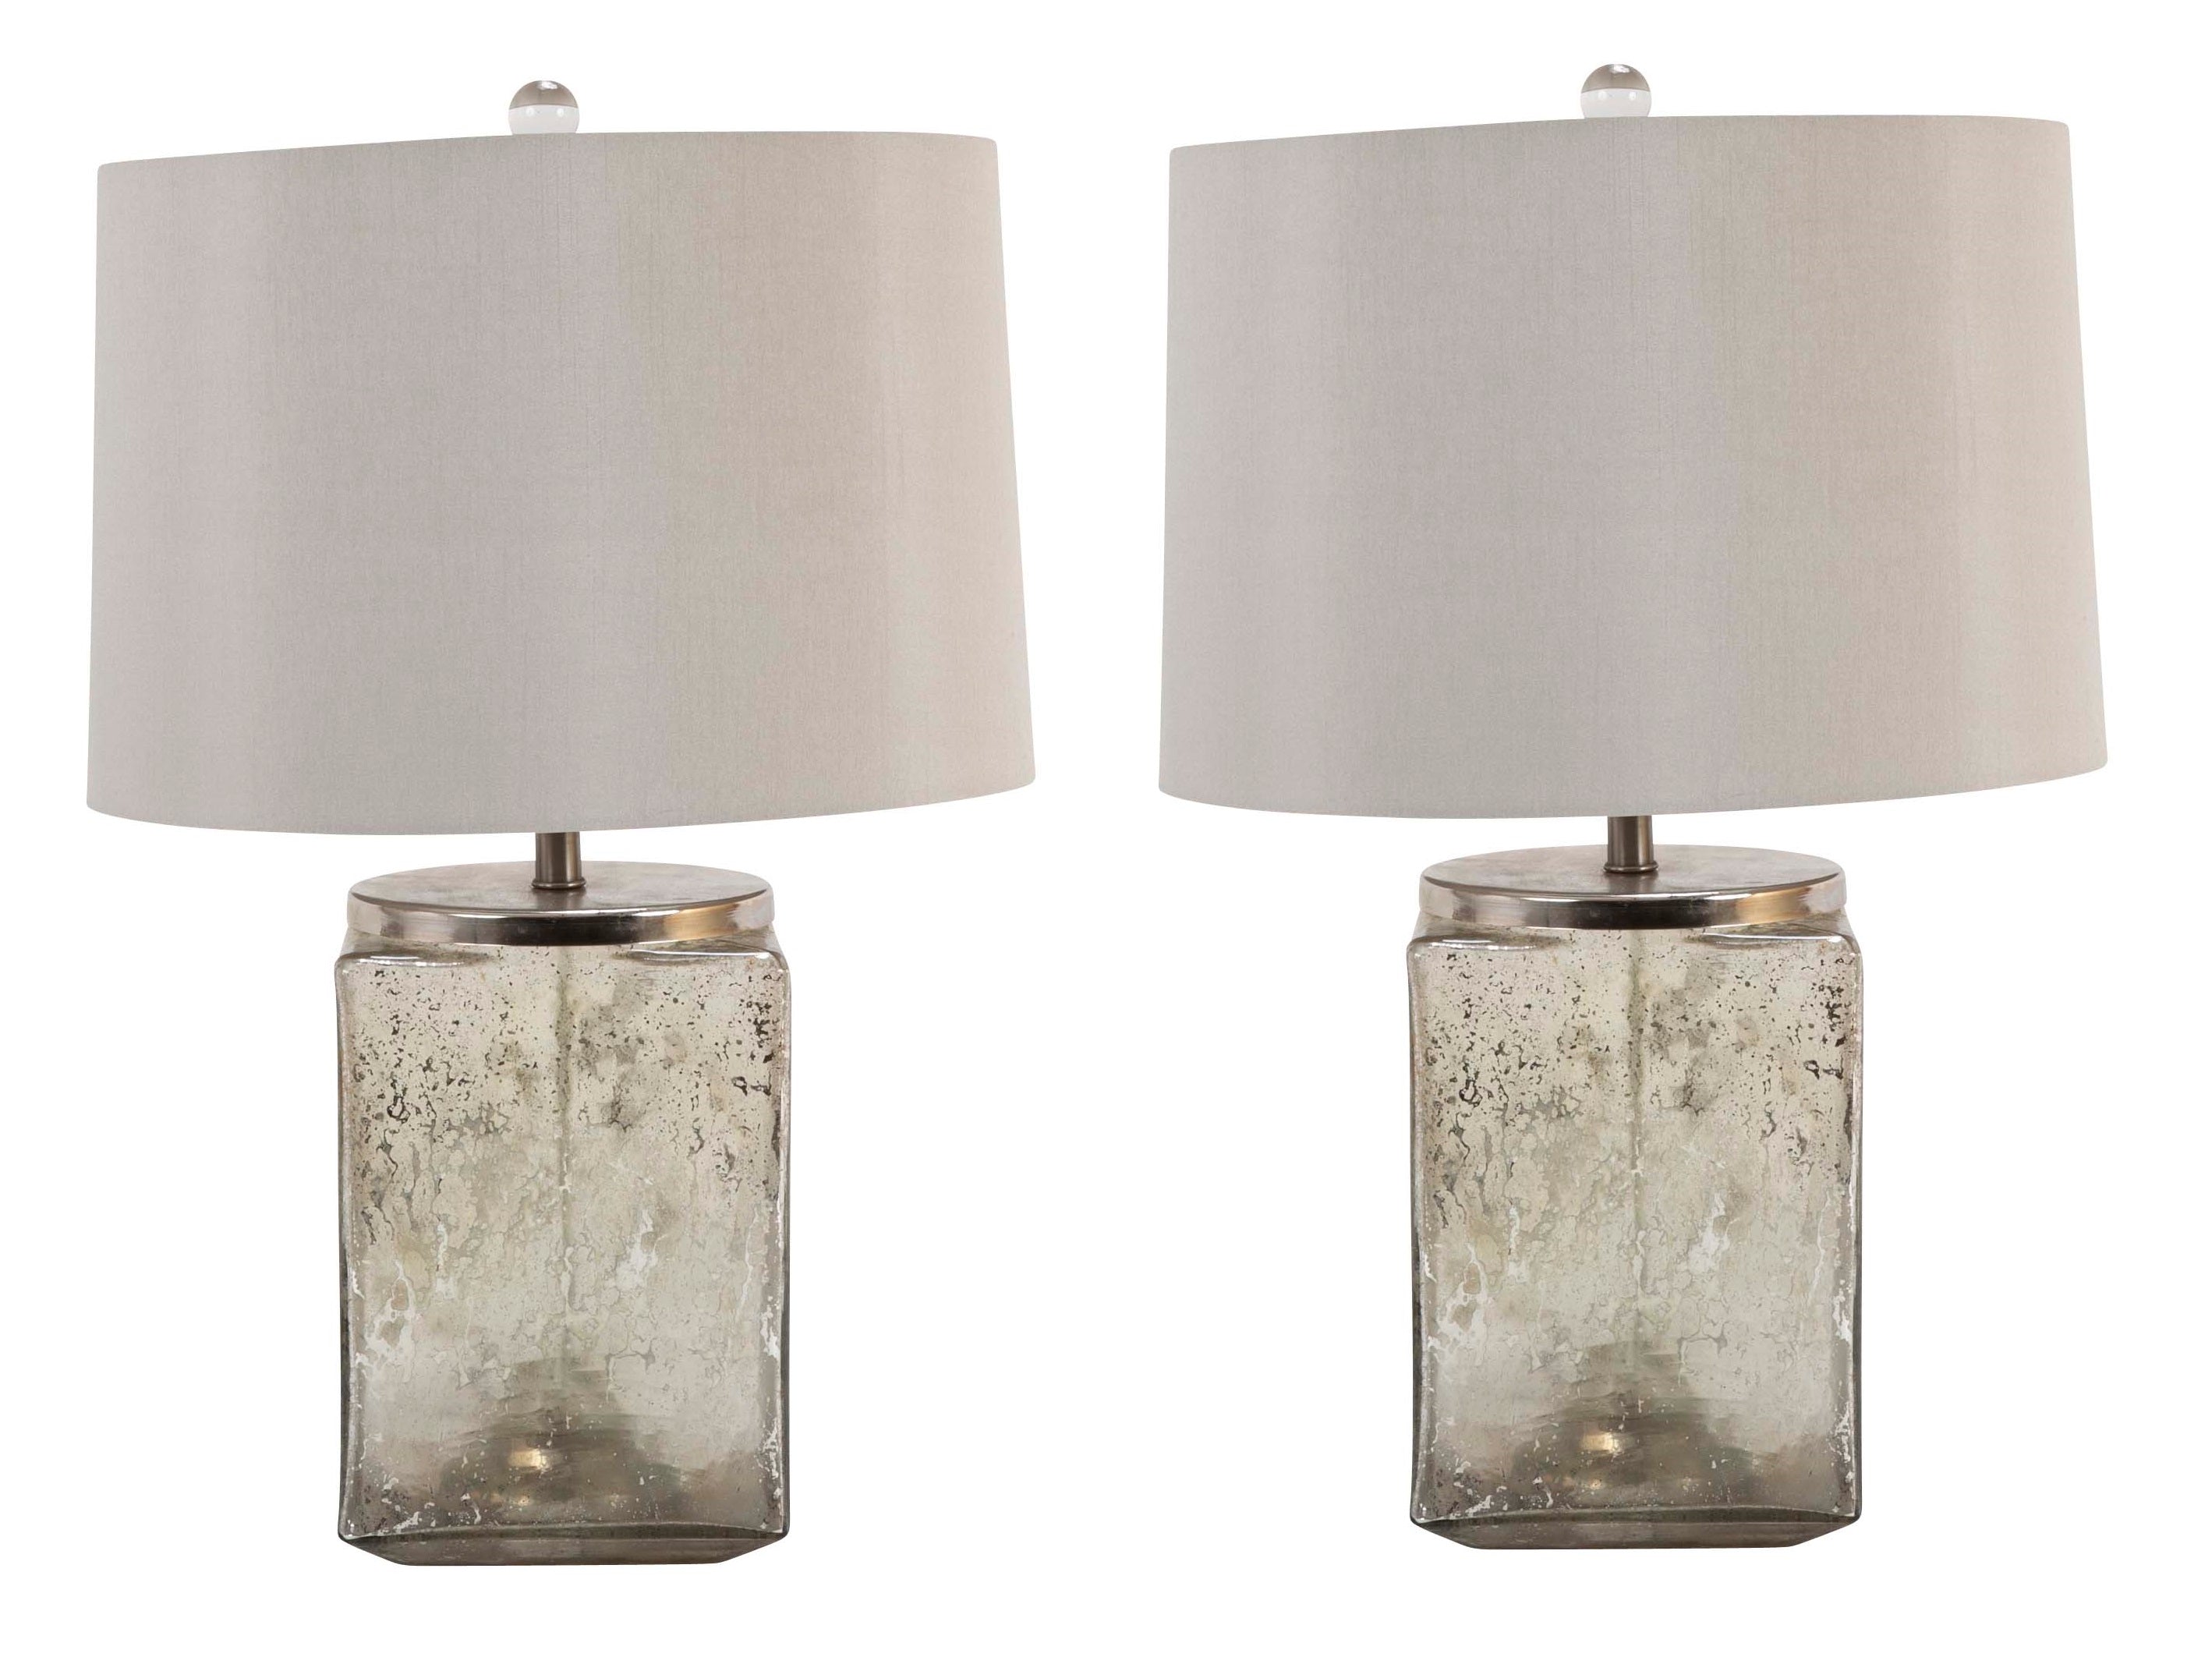 Pair of Contemporary Cube Shape Mercury Glass Lamps